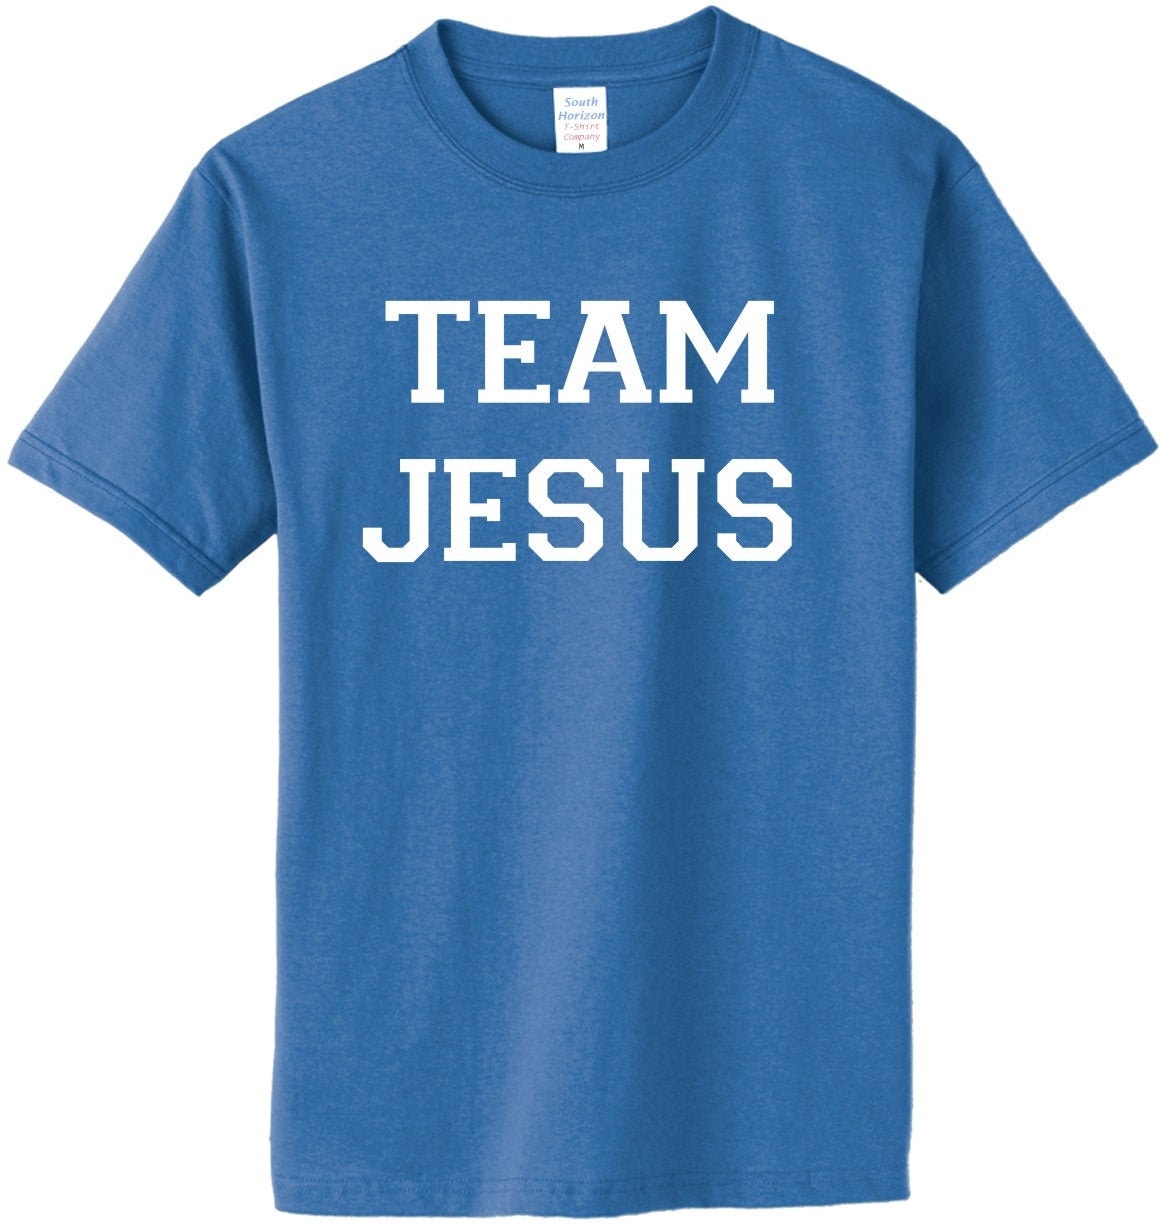 Team Jesus on Adult & Youth Cotton T-Shirt 9 Colors | Etsy